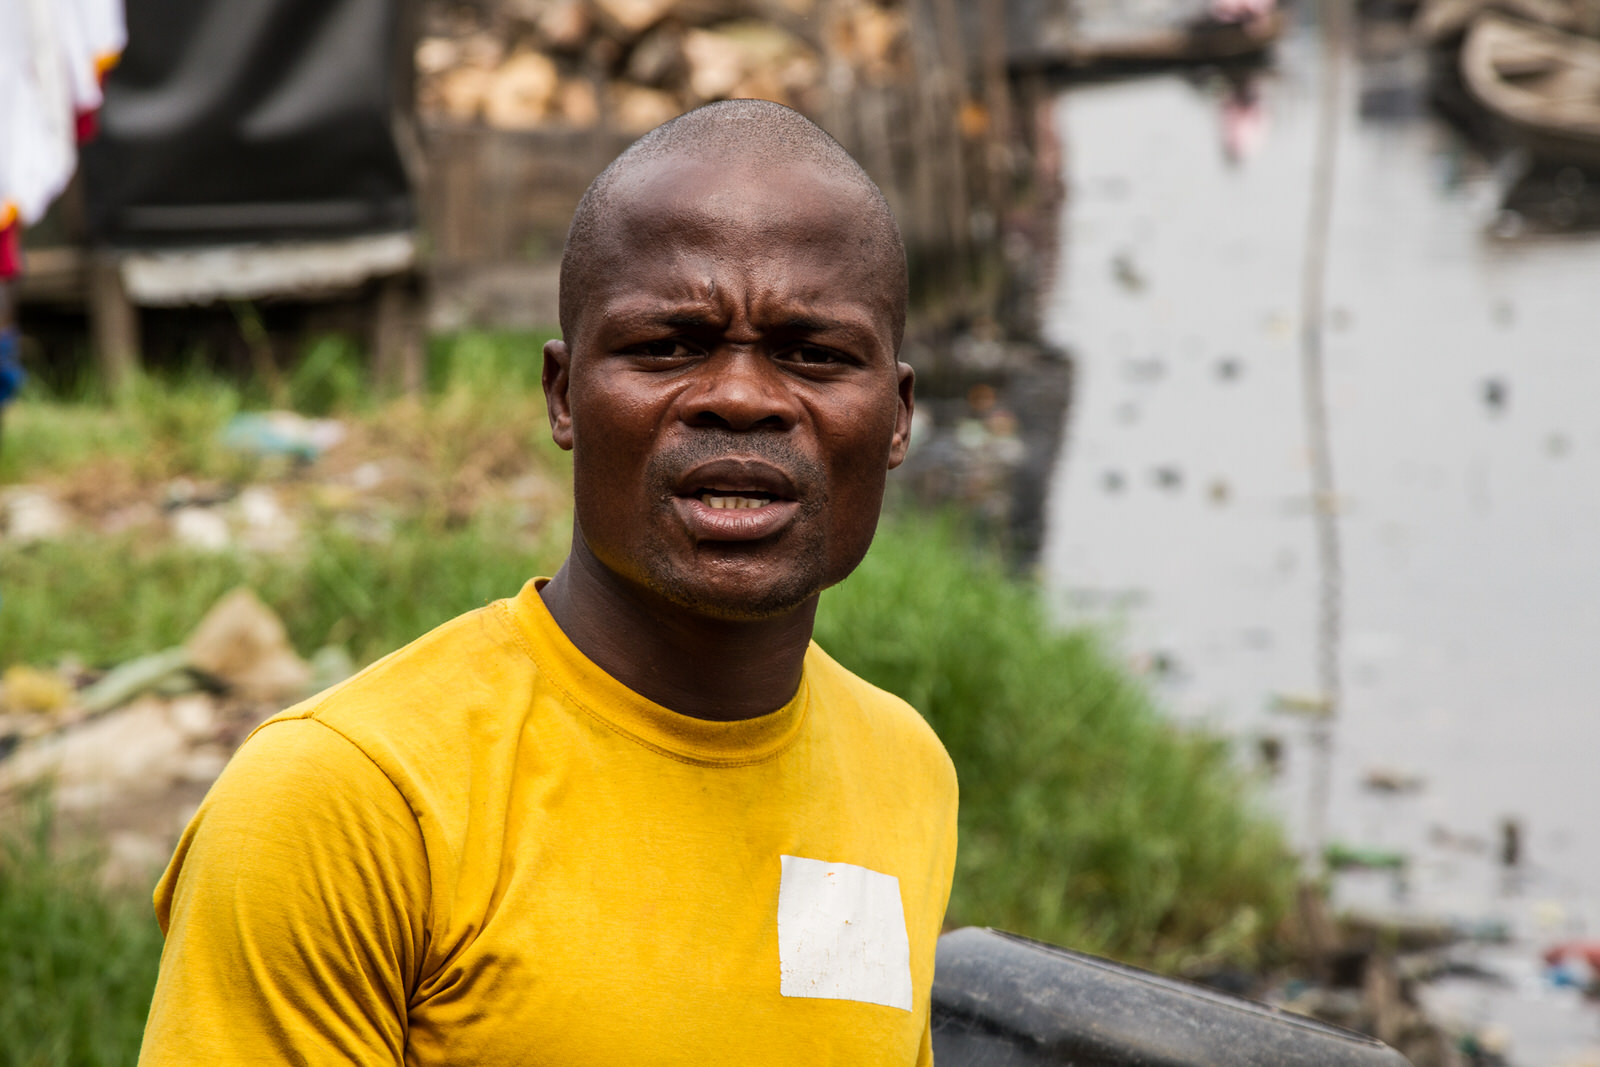  Esinsu Francis was evicted after the demolitions in Otodo Gbame. He moved to Sogunro to rent a room for himself, his wife and three children. He was able to save two or three sewing machines for his wife who is a tailor. 